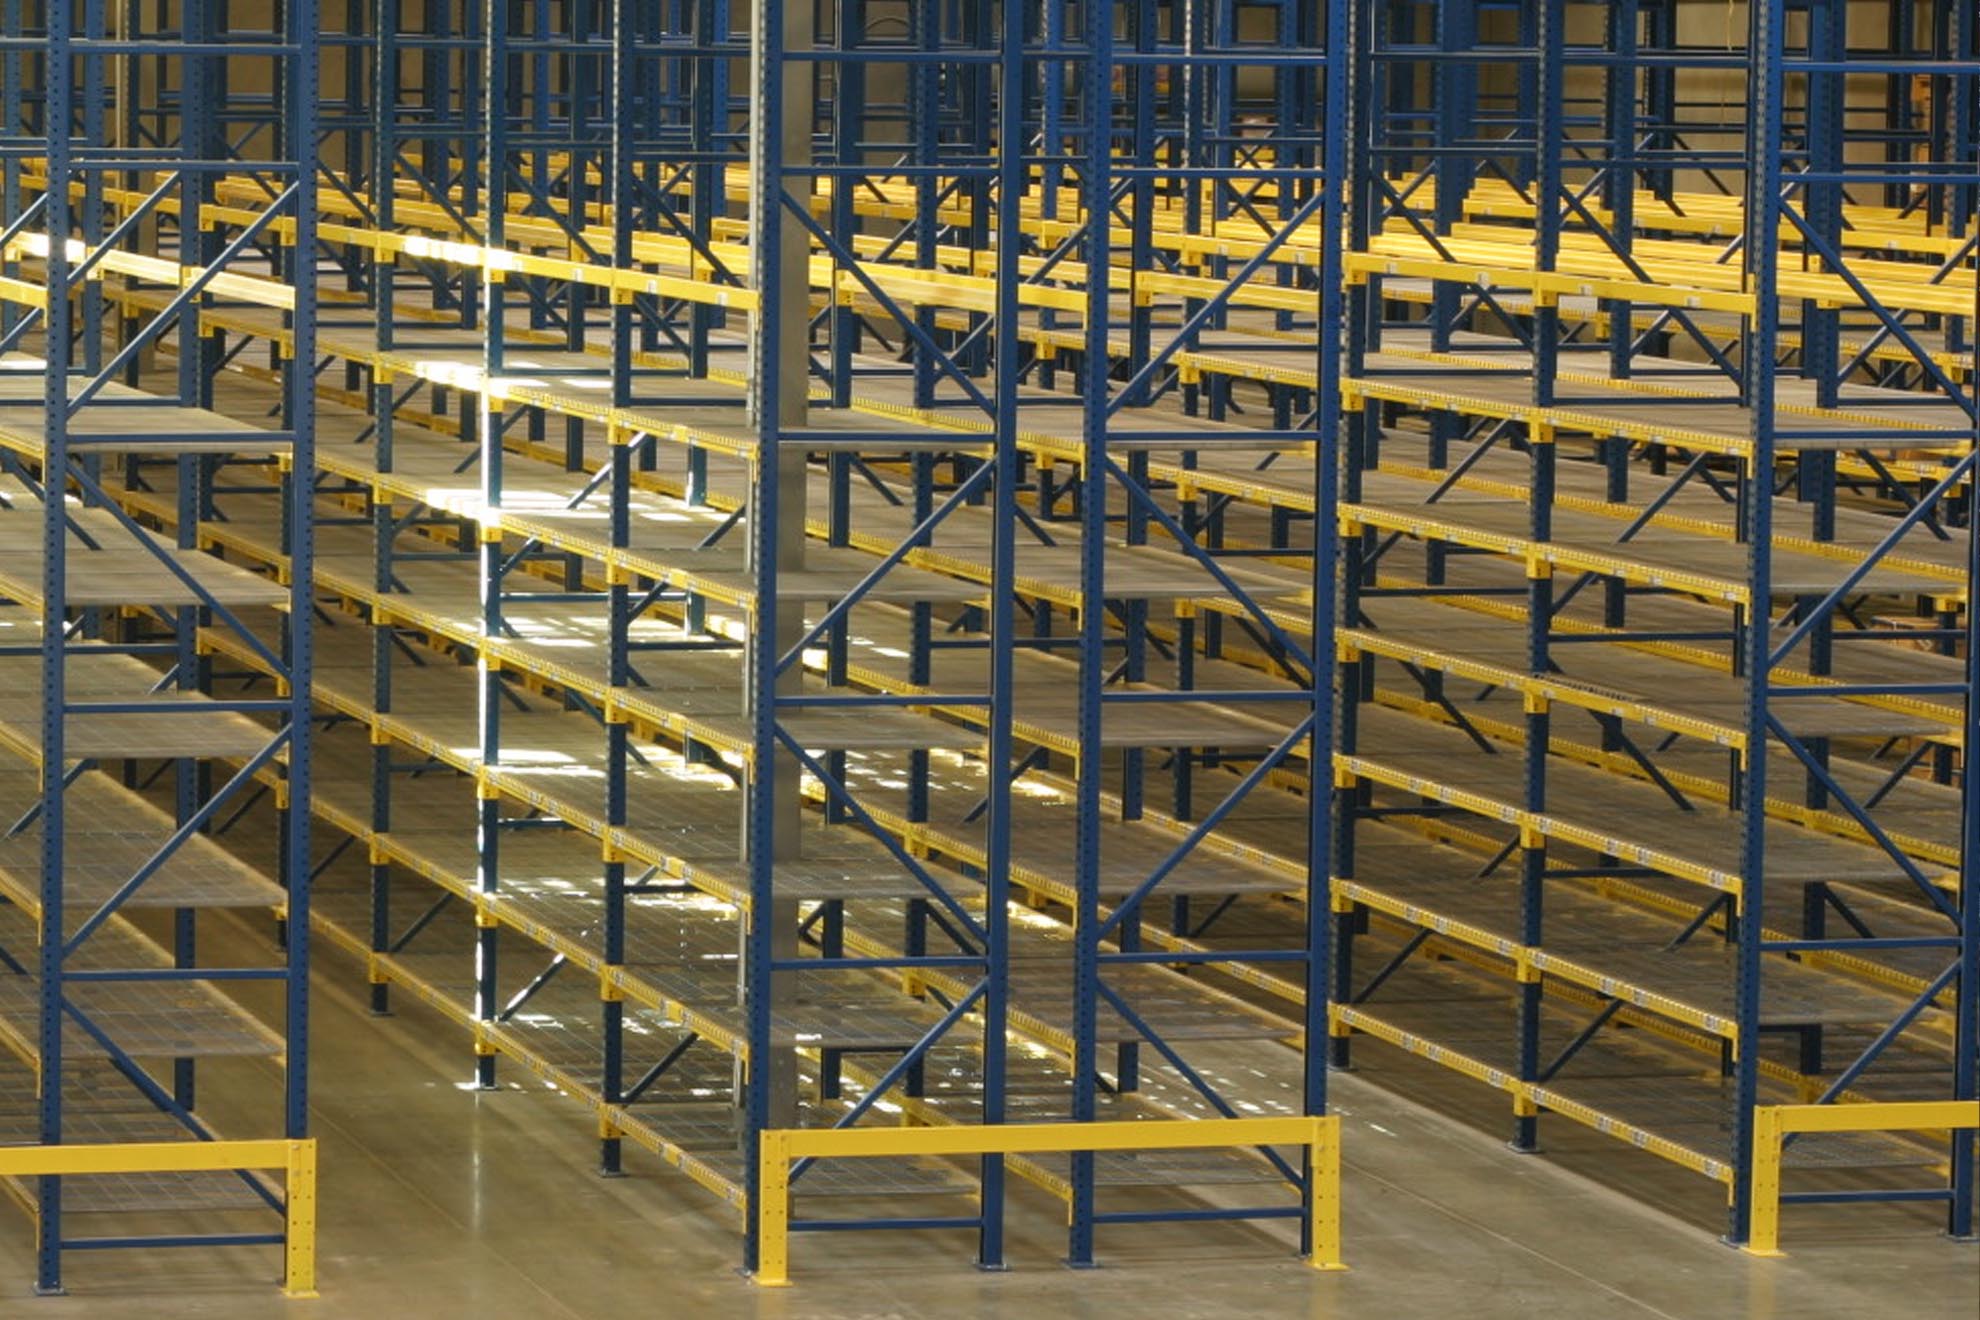 Selective Pallet Racking System for Immediate Access to Every Stored Pallet